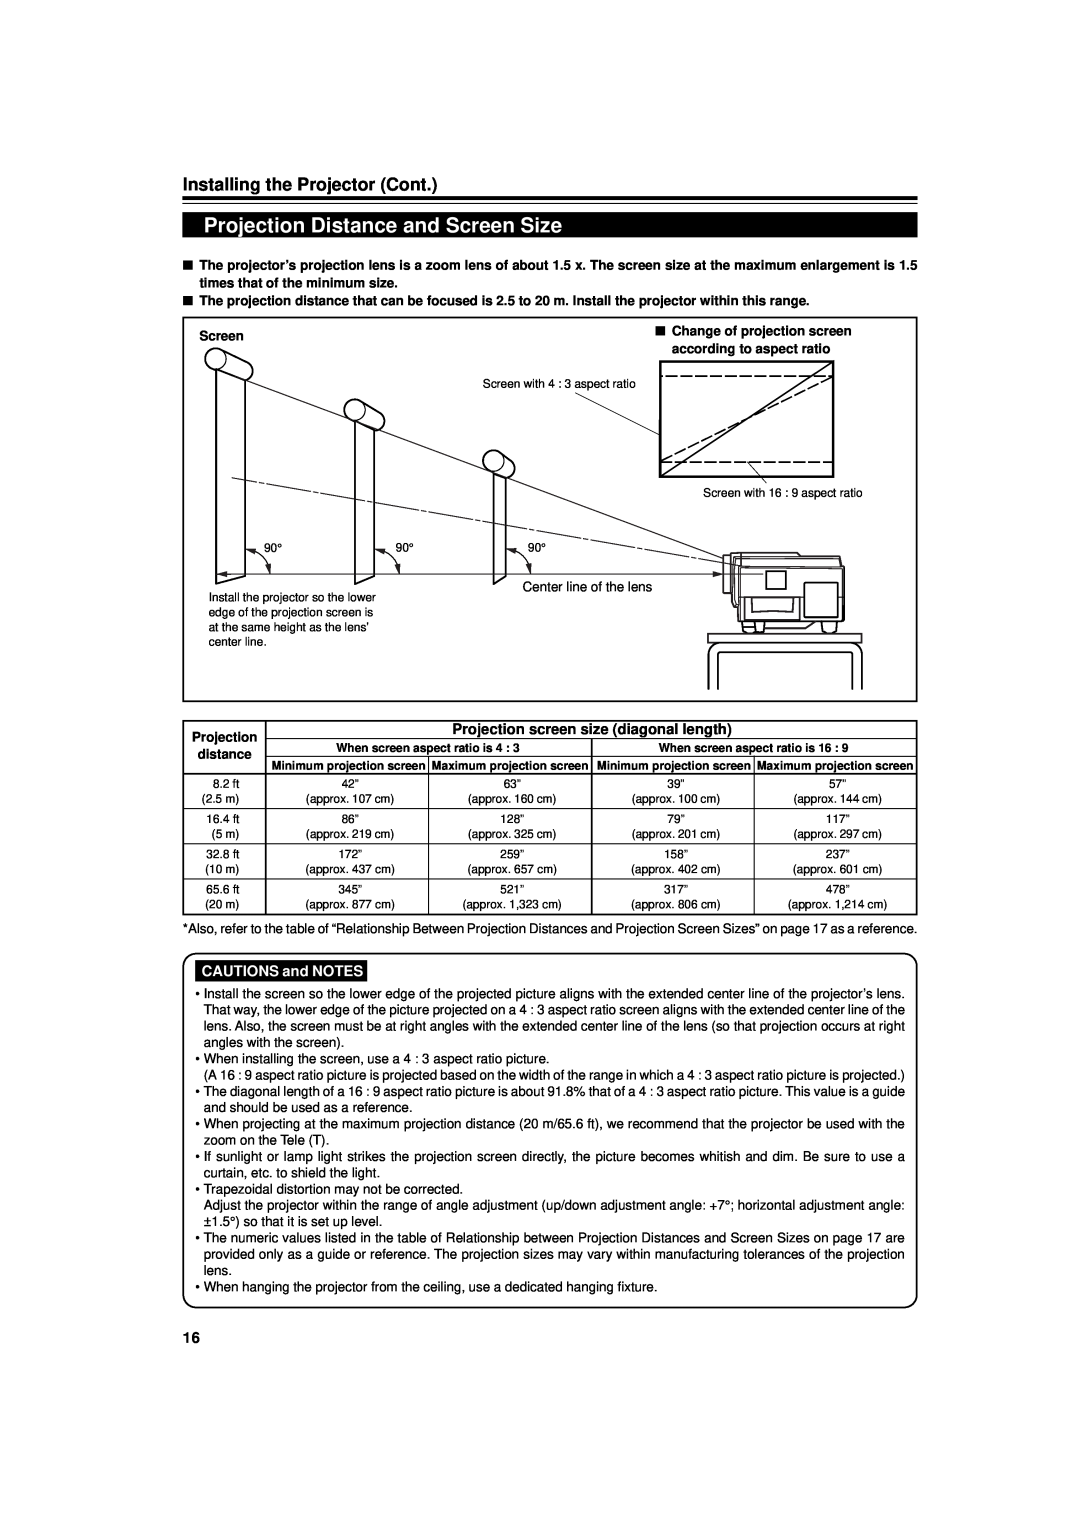 JVC DLA-G11U Projection Distance and Screen Size, Installing the Projector Cont, Projection screen size diagonal length 